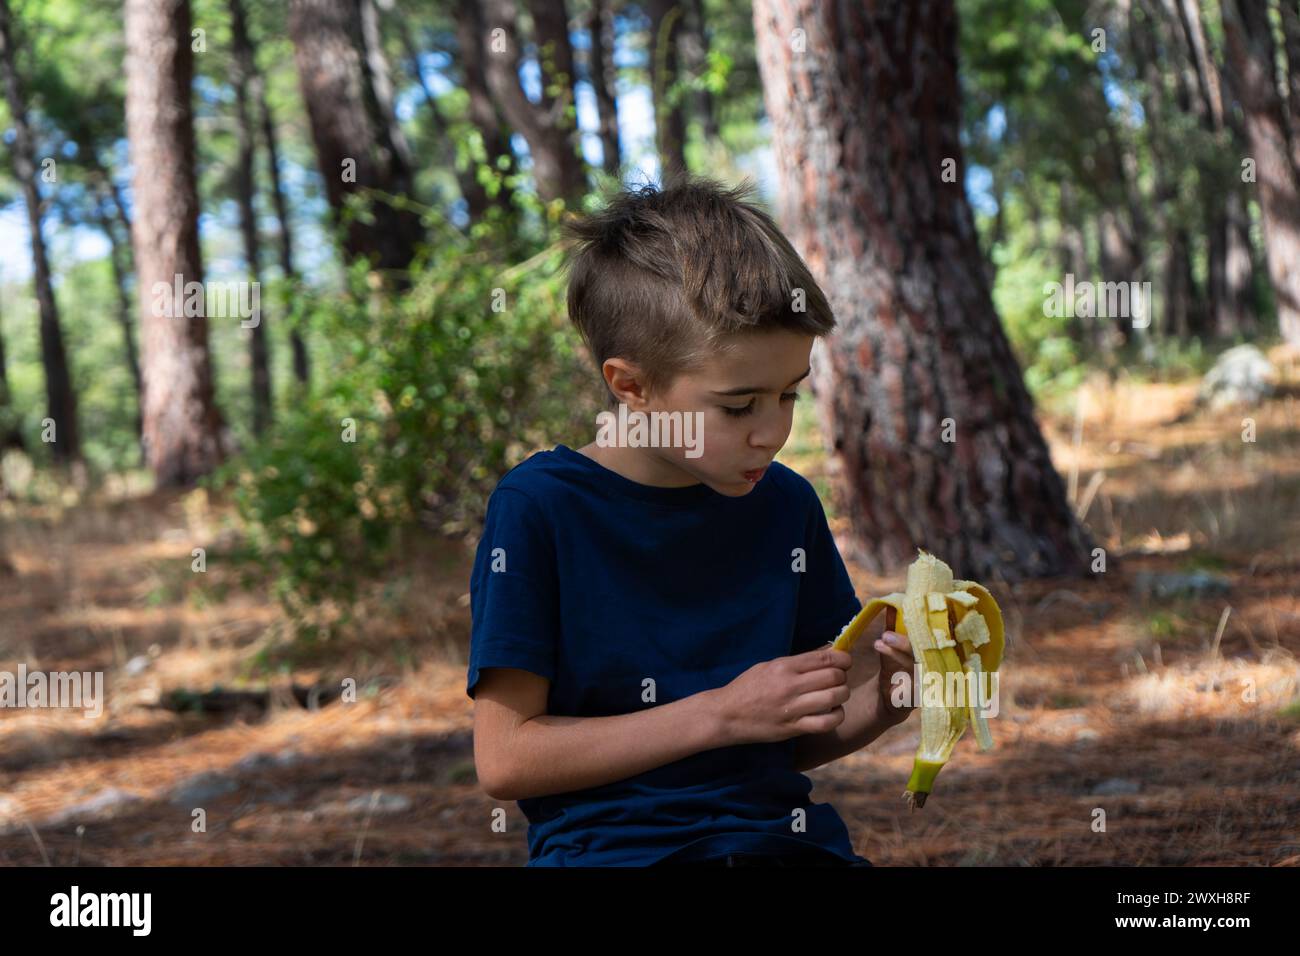 Child eating a banana in the forest Stock Photo